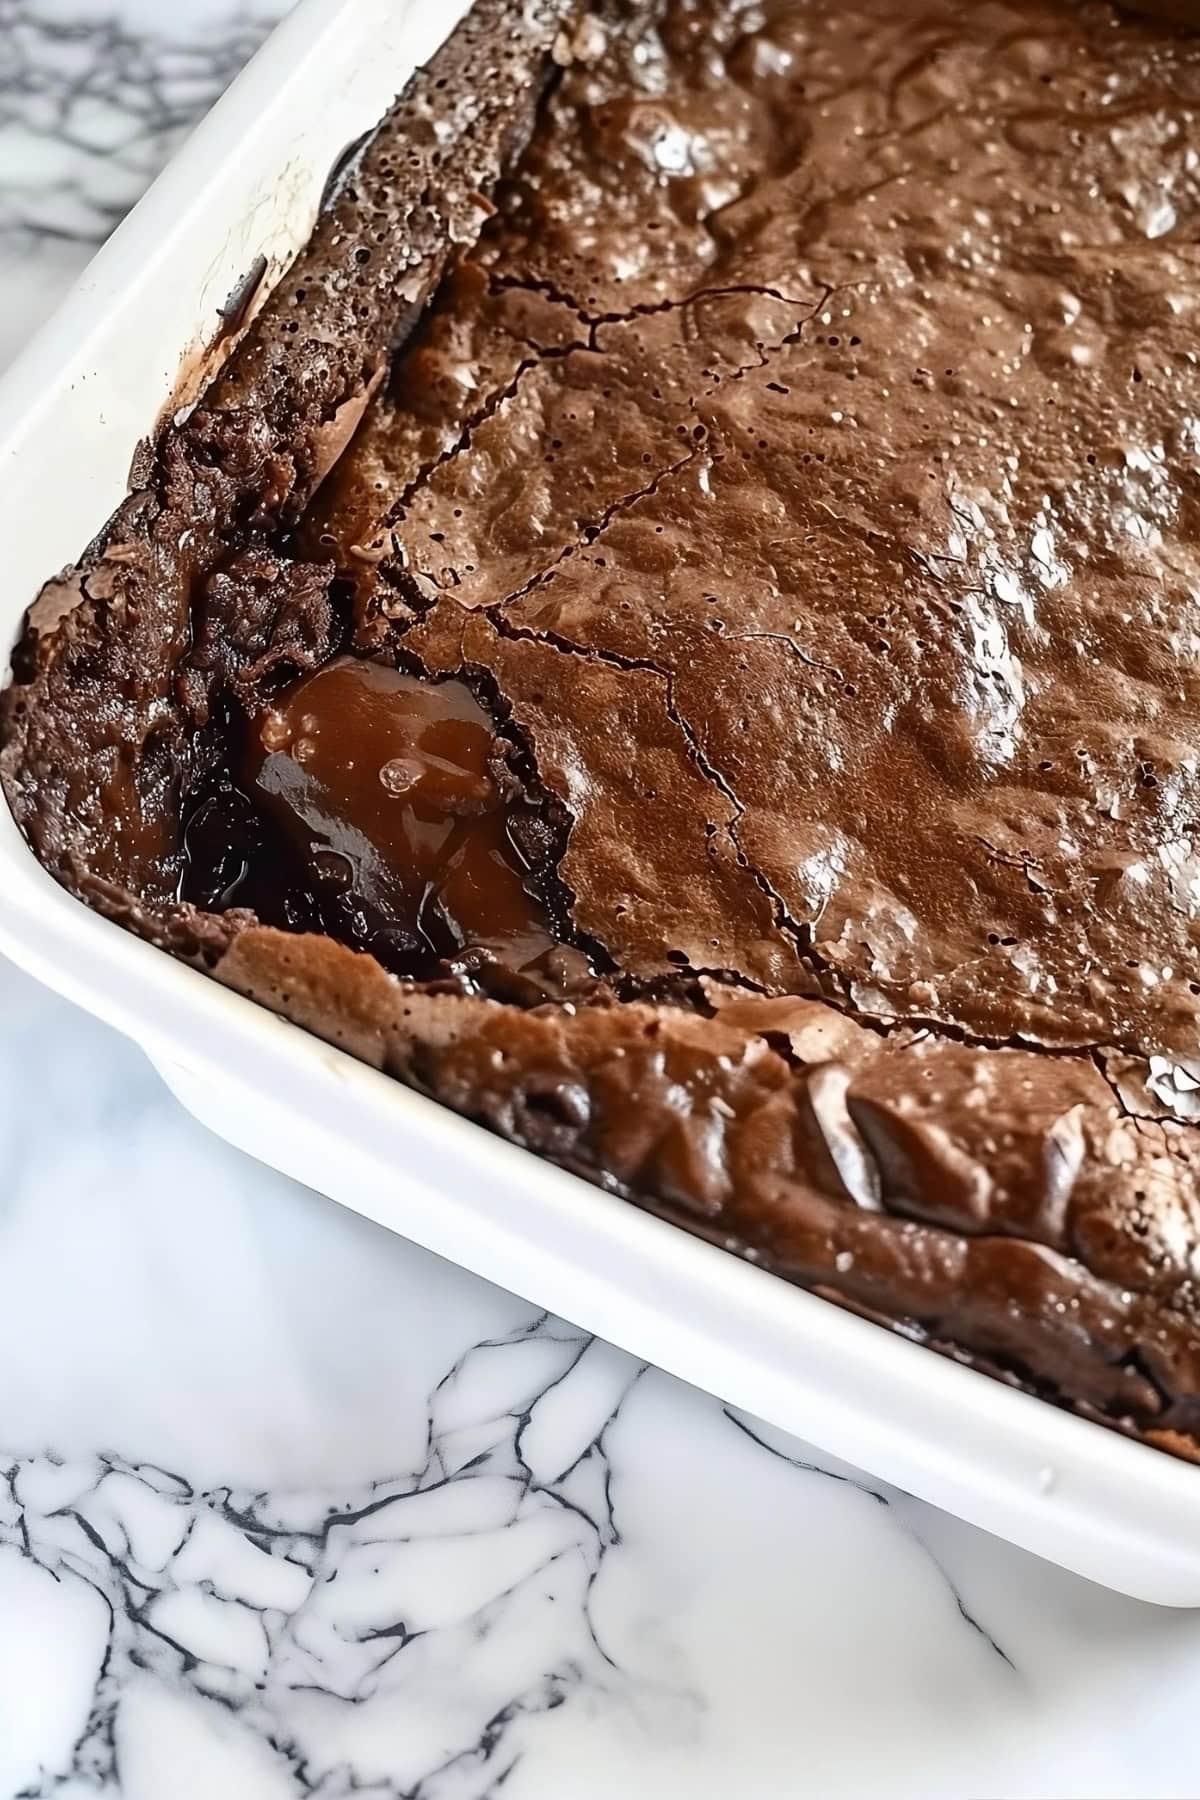 Baking dish with chocolate cobbler.